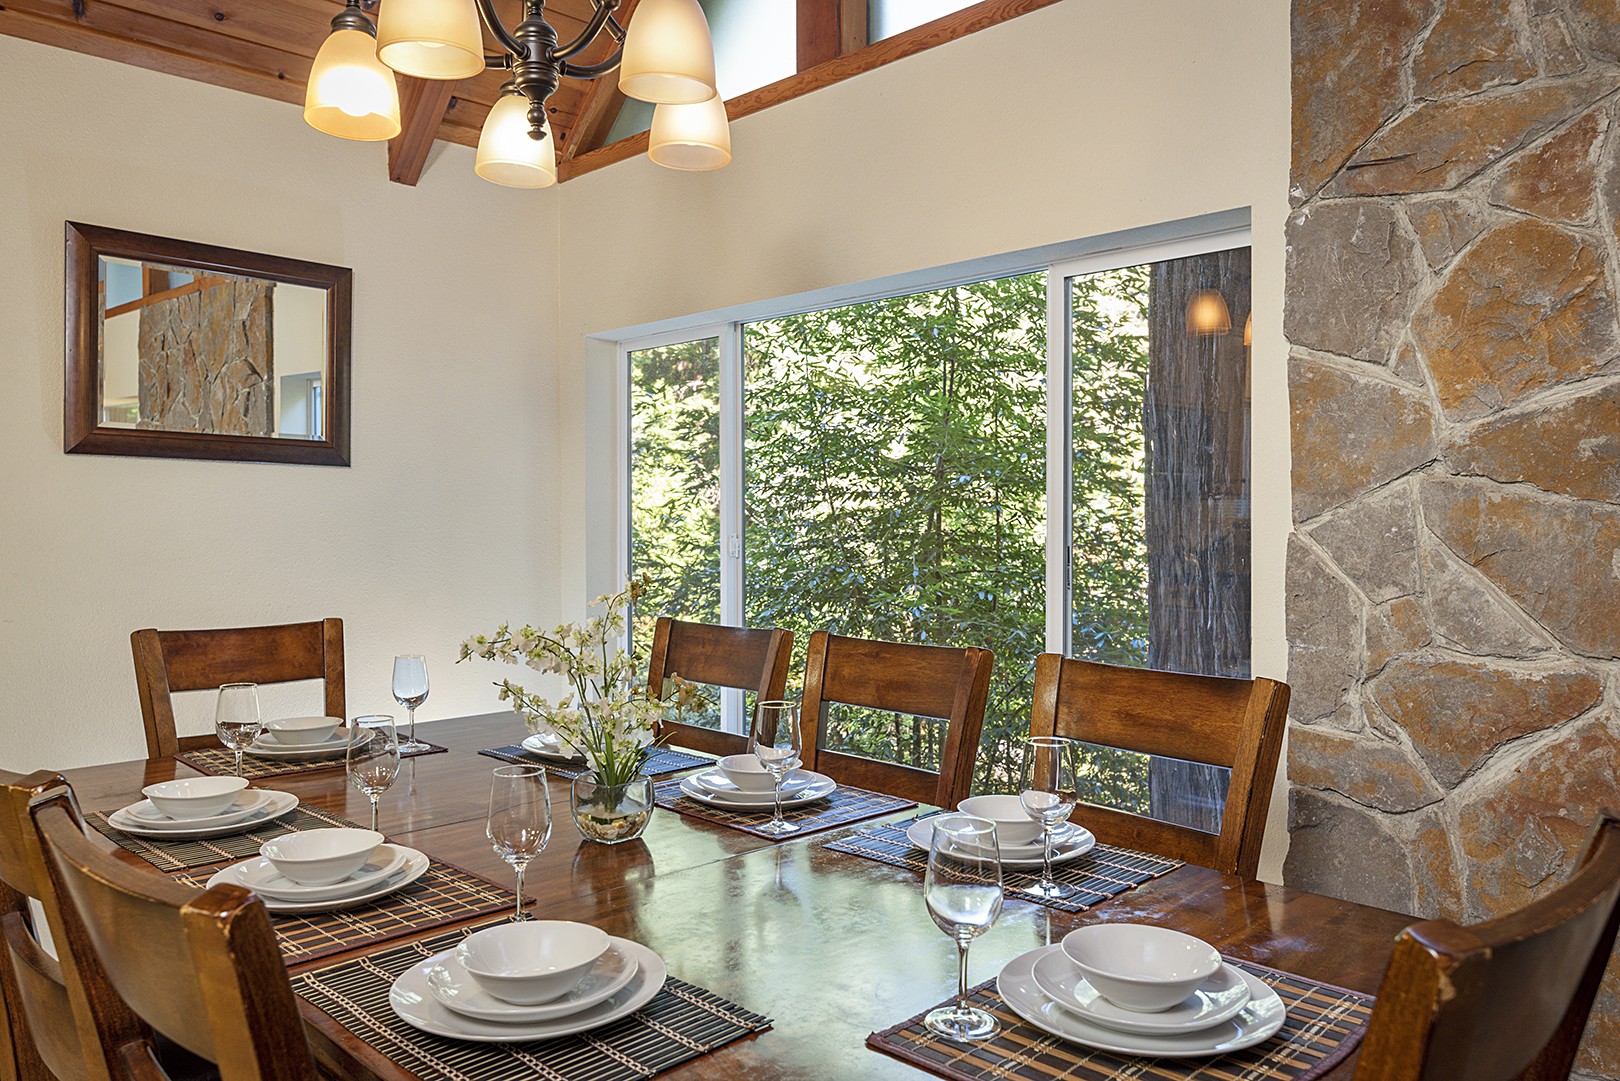 Room for 8 and creekfront views at the dining table.